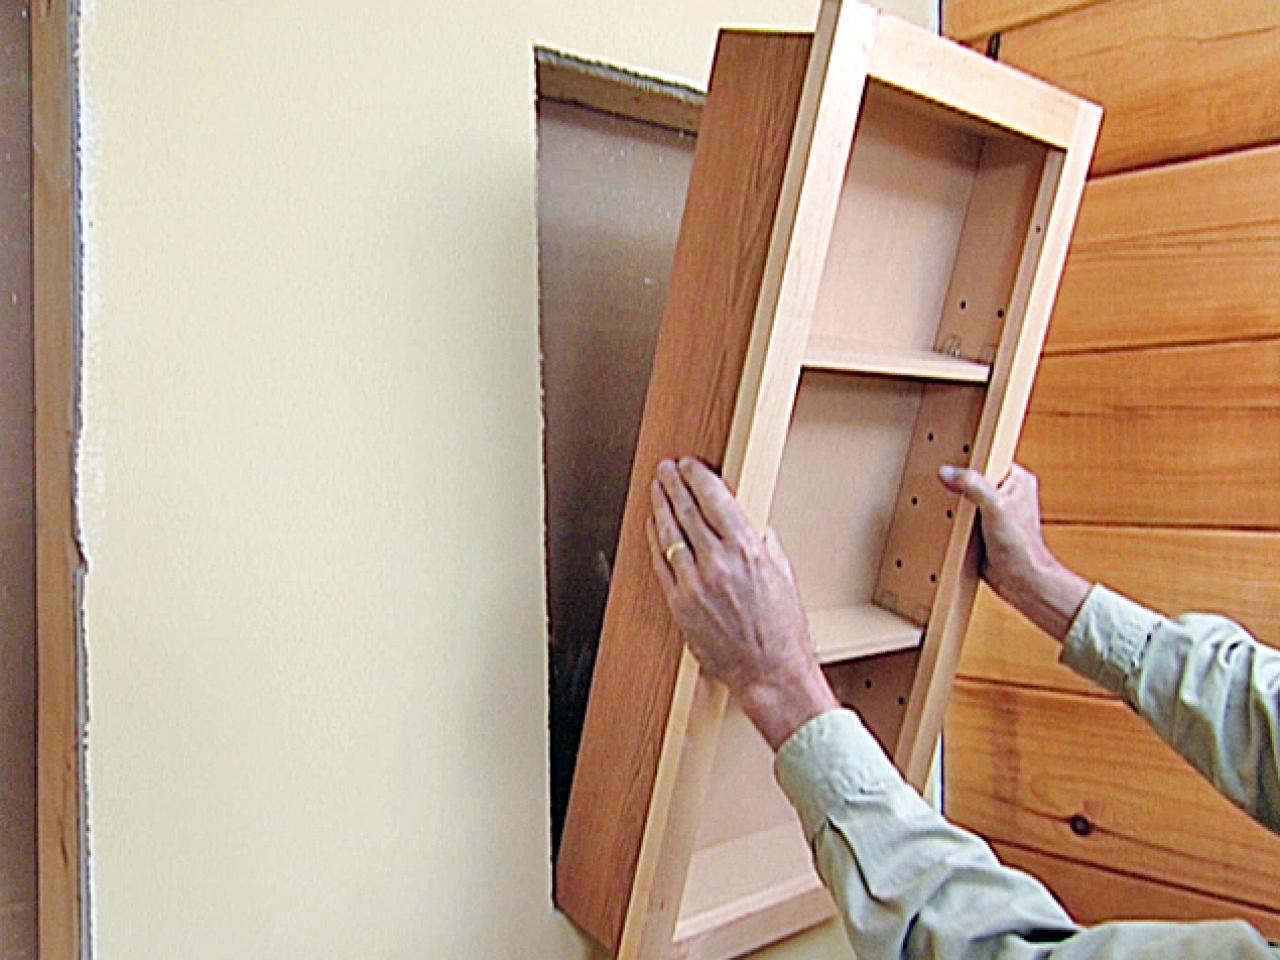 How to Attach a Pre-Fabricated Medicine Cabinet | how-tos ...